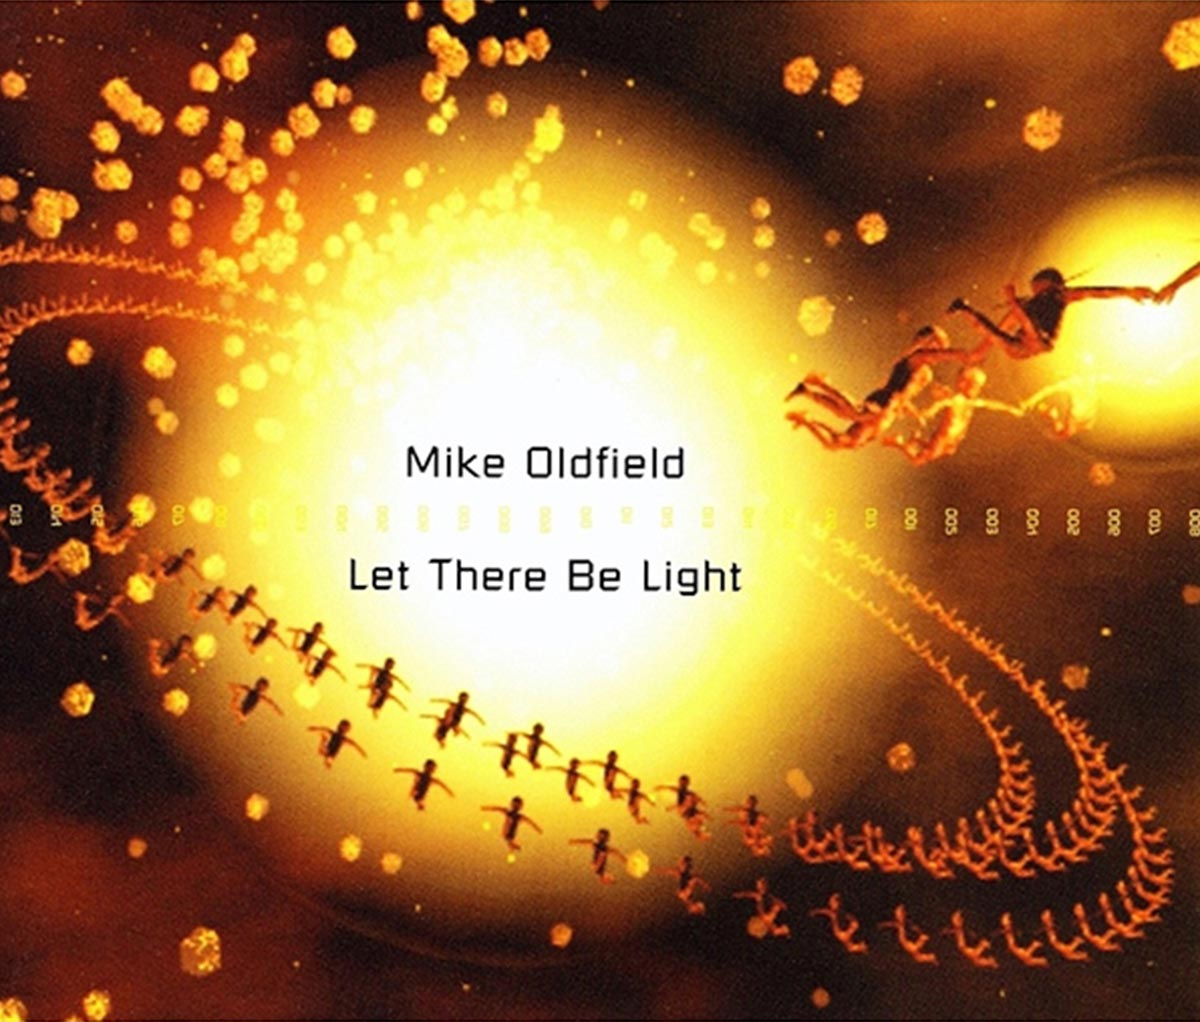 Let There be Light: Mike Oldfield